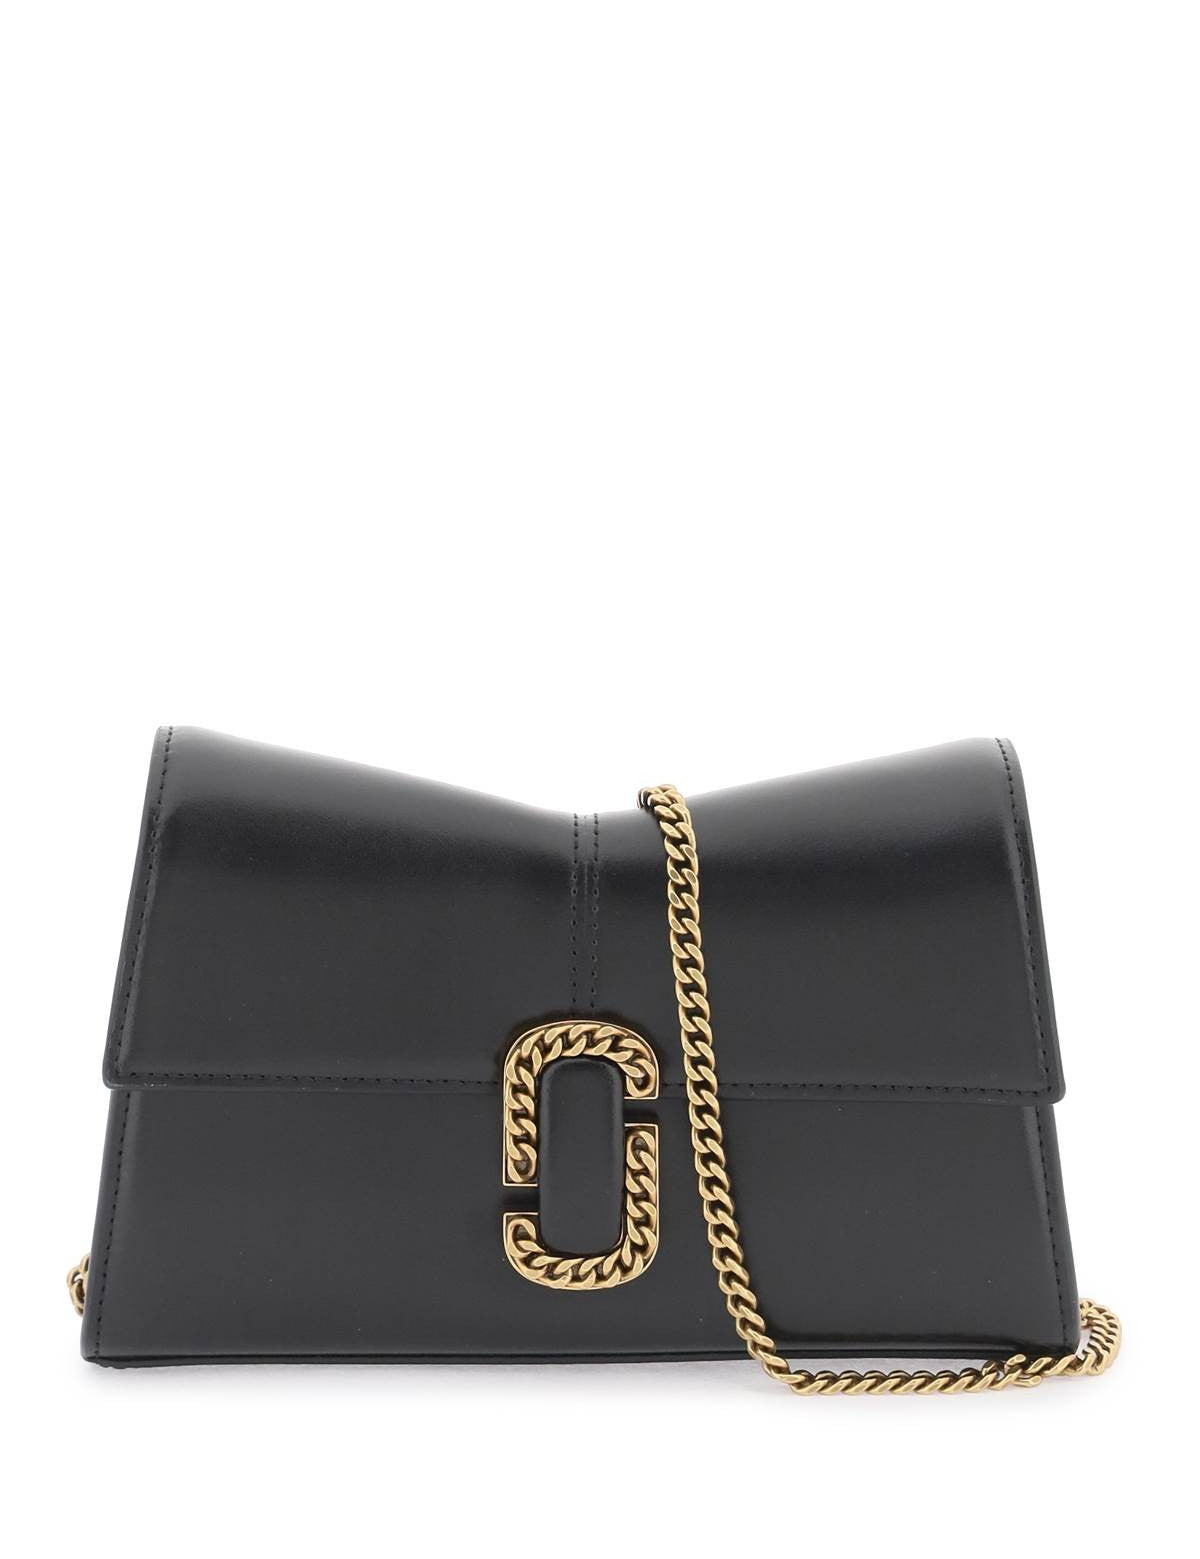 marc-jacobs-the-mini-shoulder-bag-with-st-marc-chain-wallet.jpg